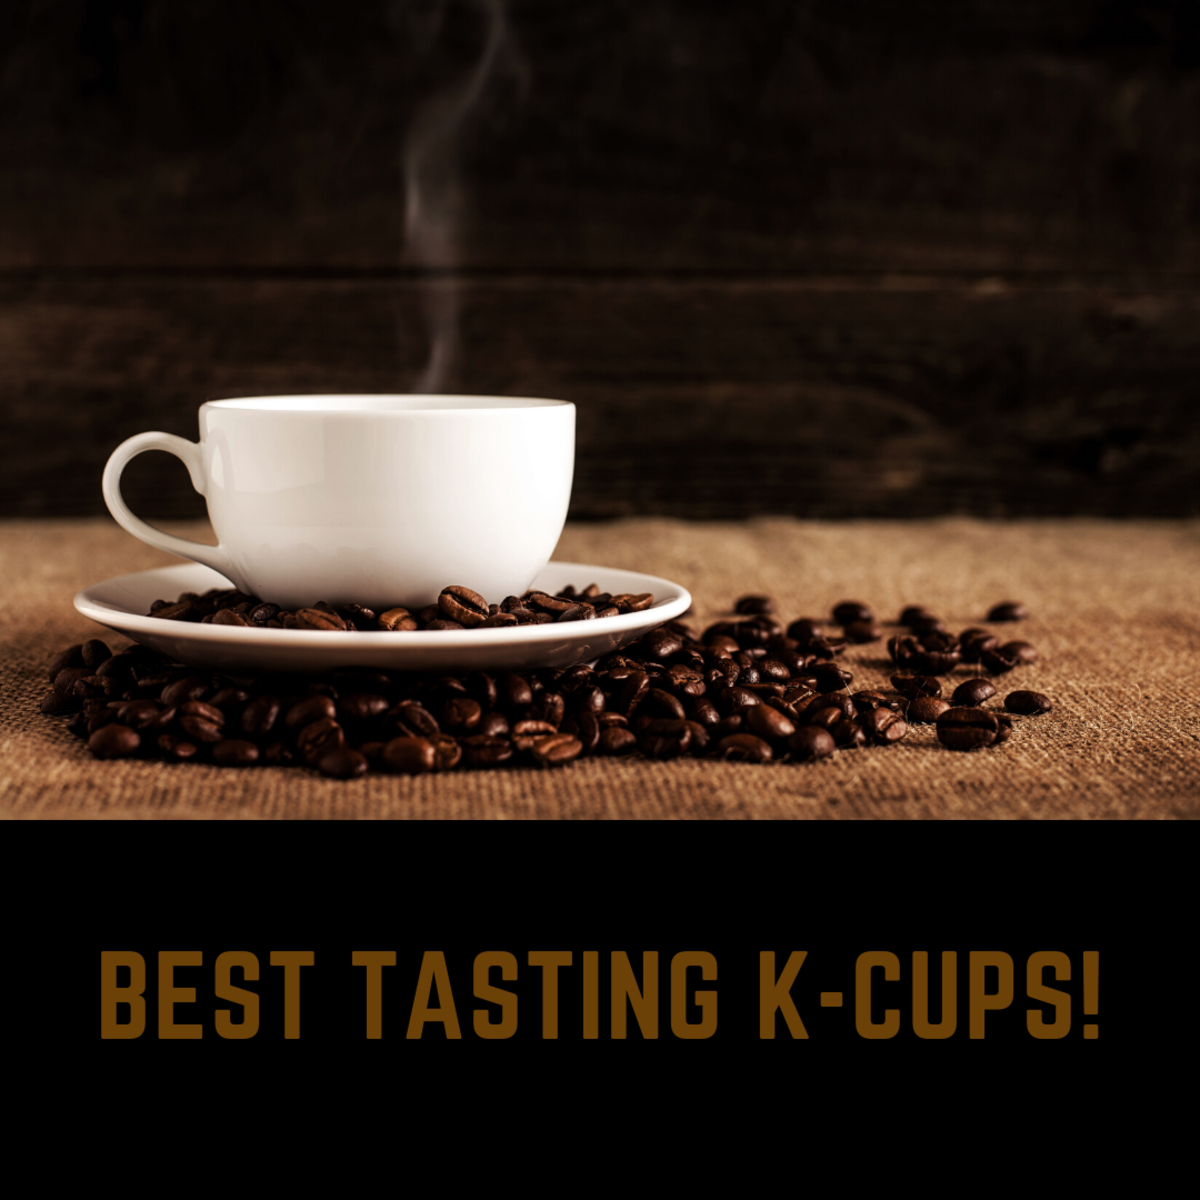 K-cups are a quick way to get a delicious cup of coffee. 